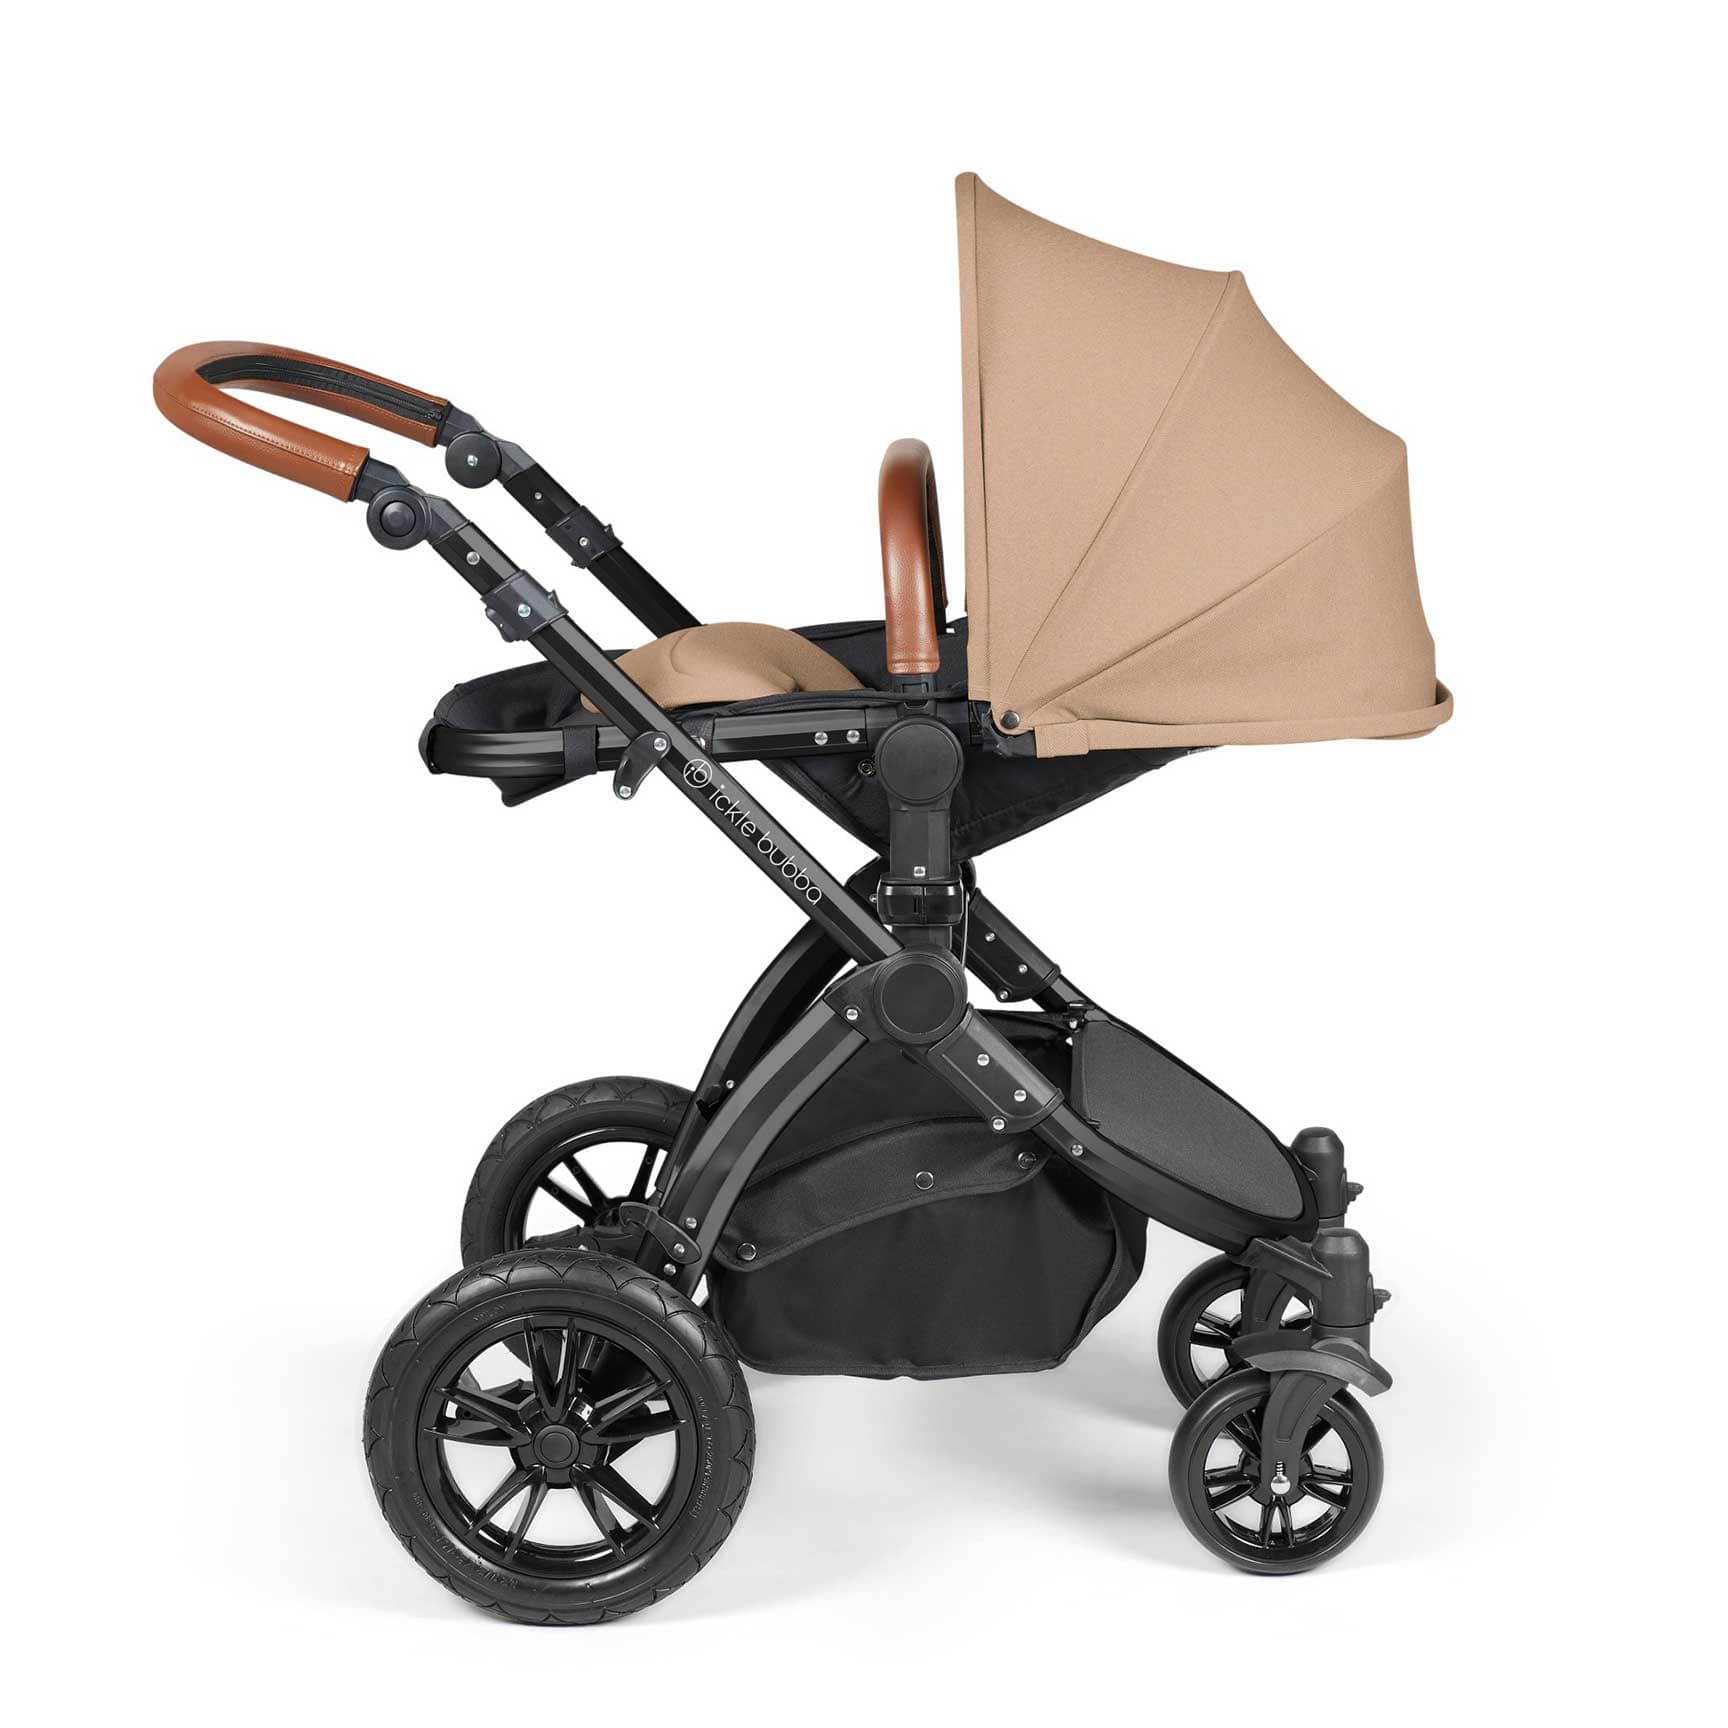 Ickle Bubba Stomp Luxe All-in-One Travel System with Isofix Base in Black/Desert/Tan Travel Systems 10-011-300-209 5056515026481